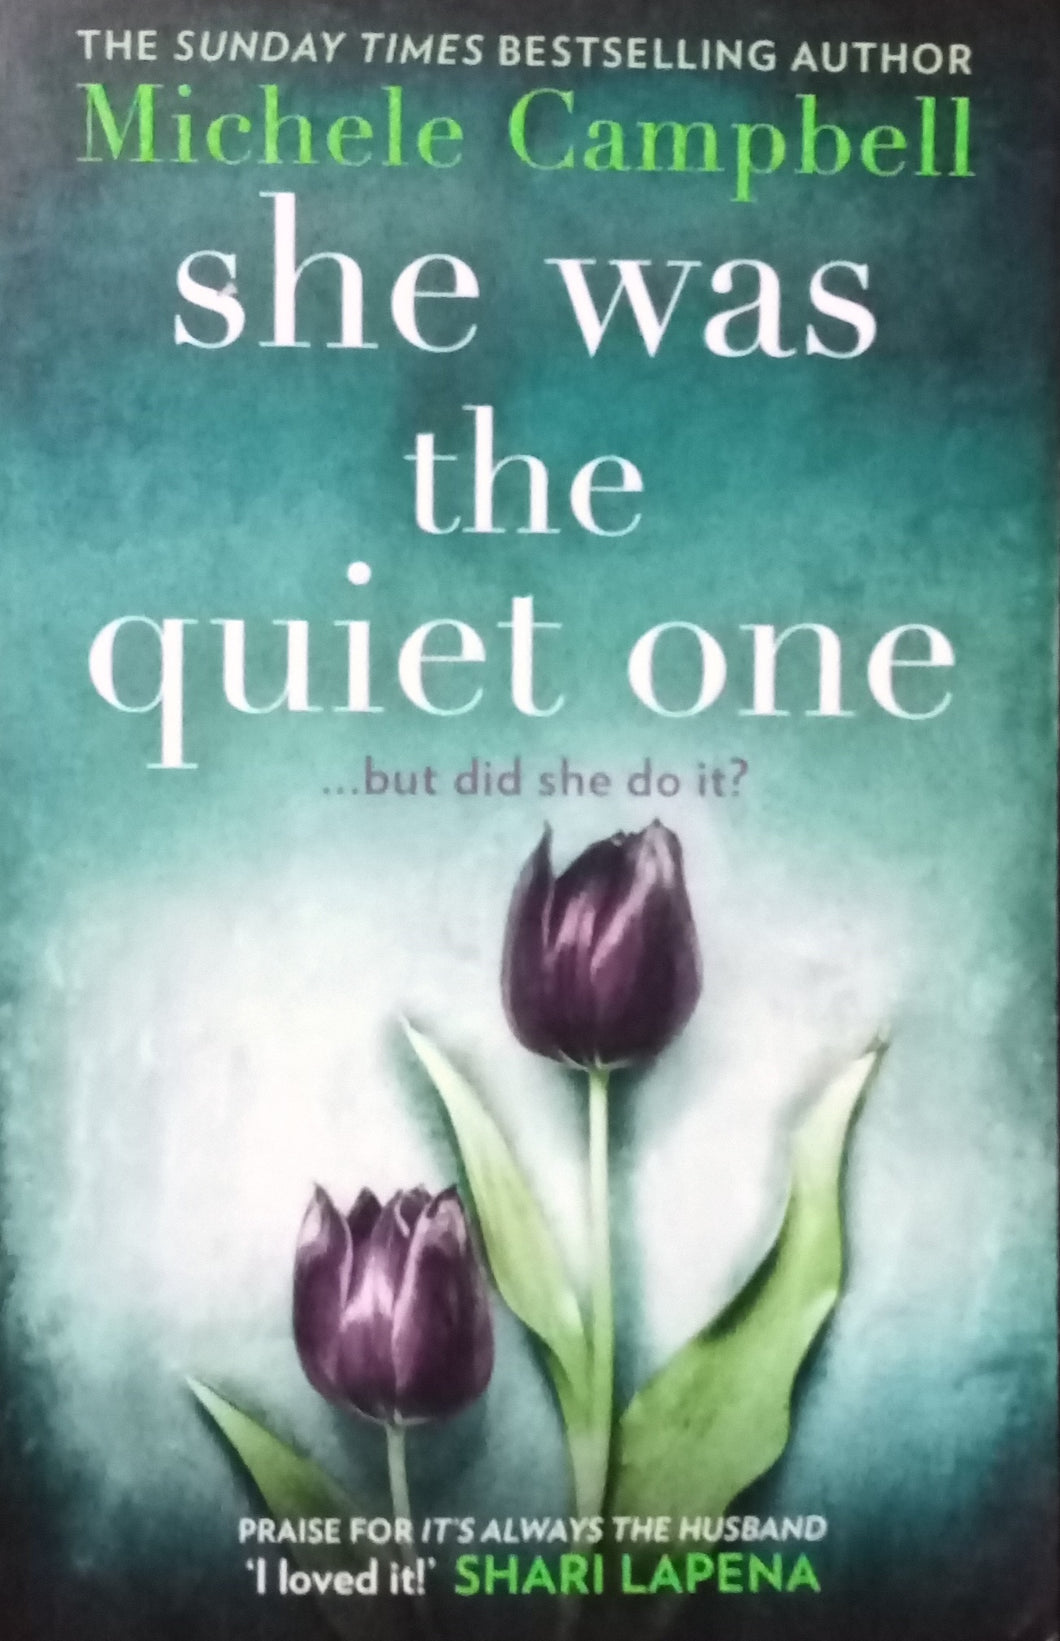 She was the Quiet One by Michele Campbell